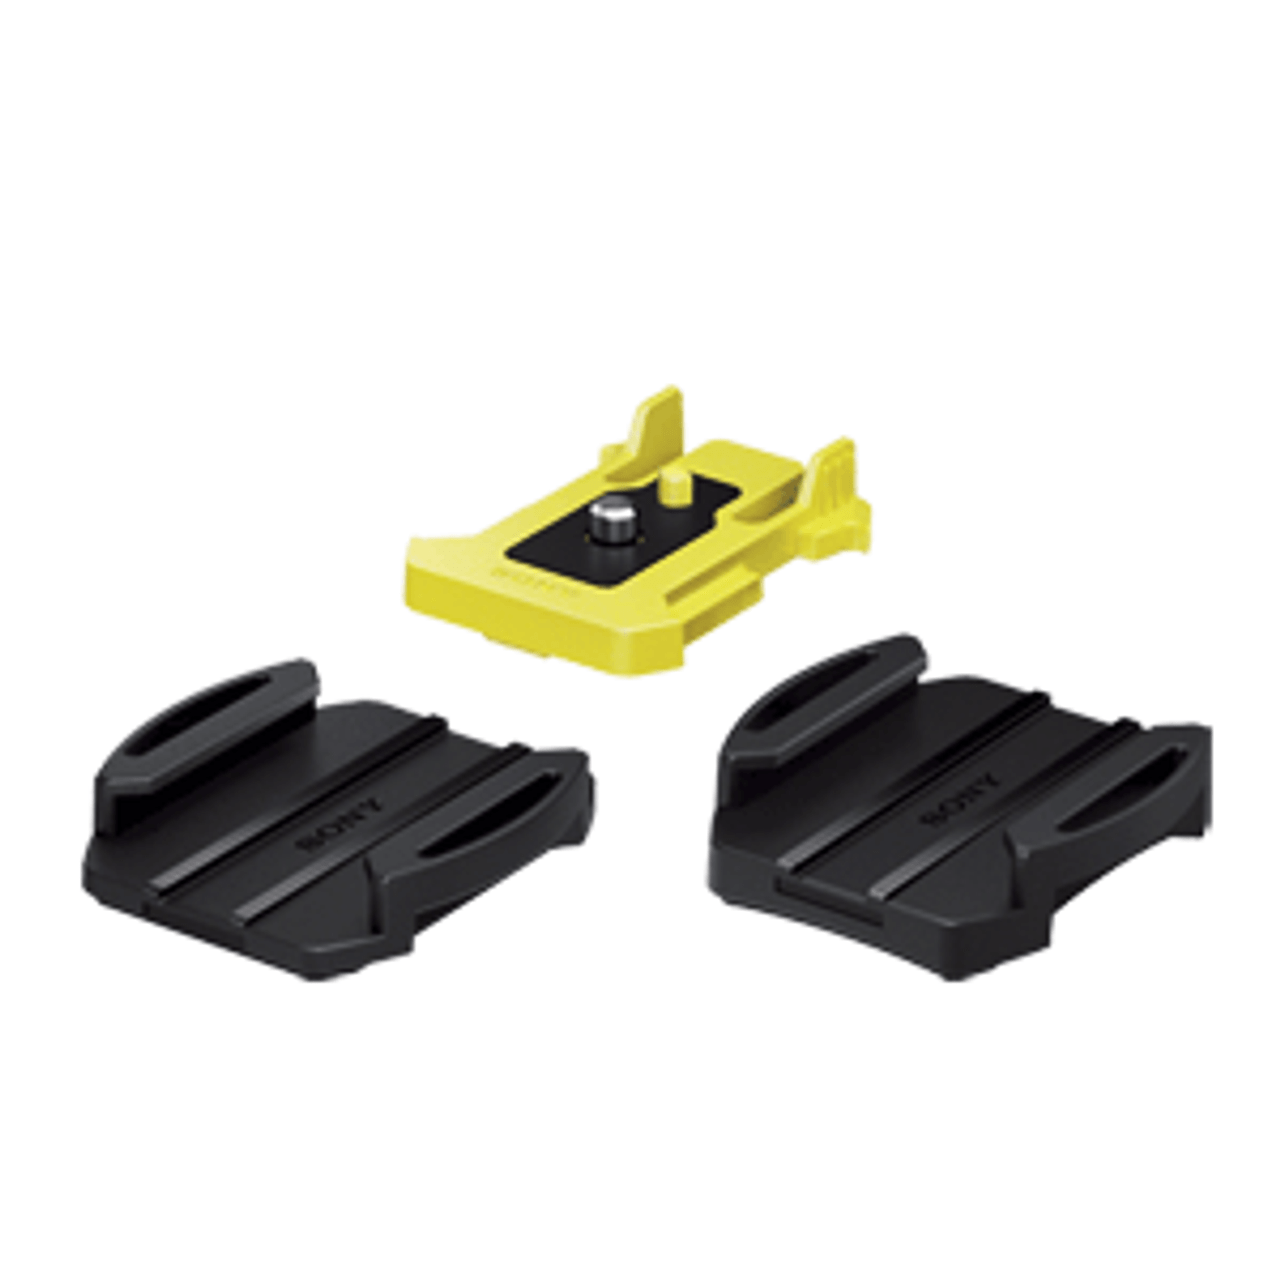 Sony Action Cam Adhesive Mount Pack